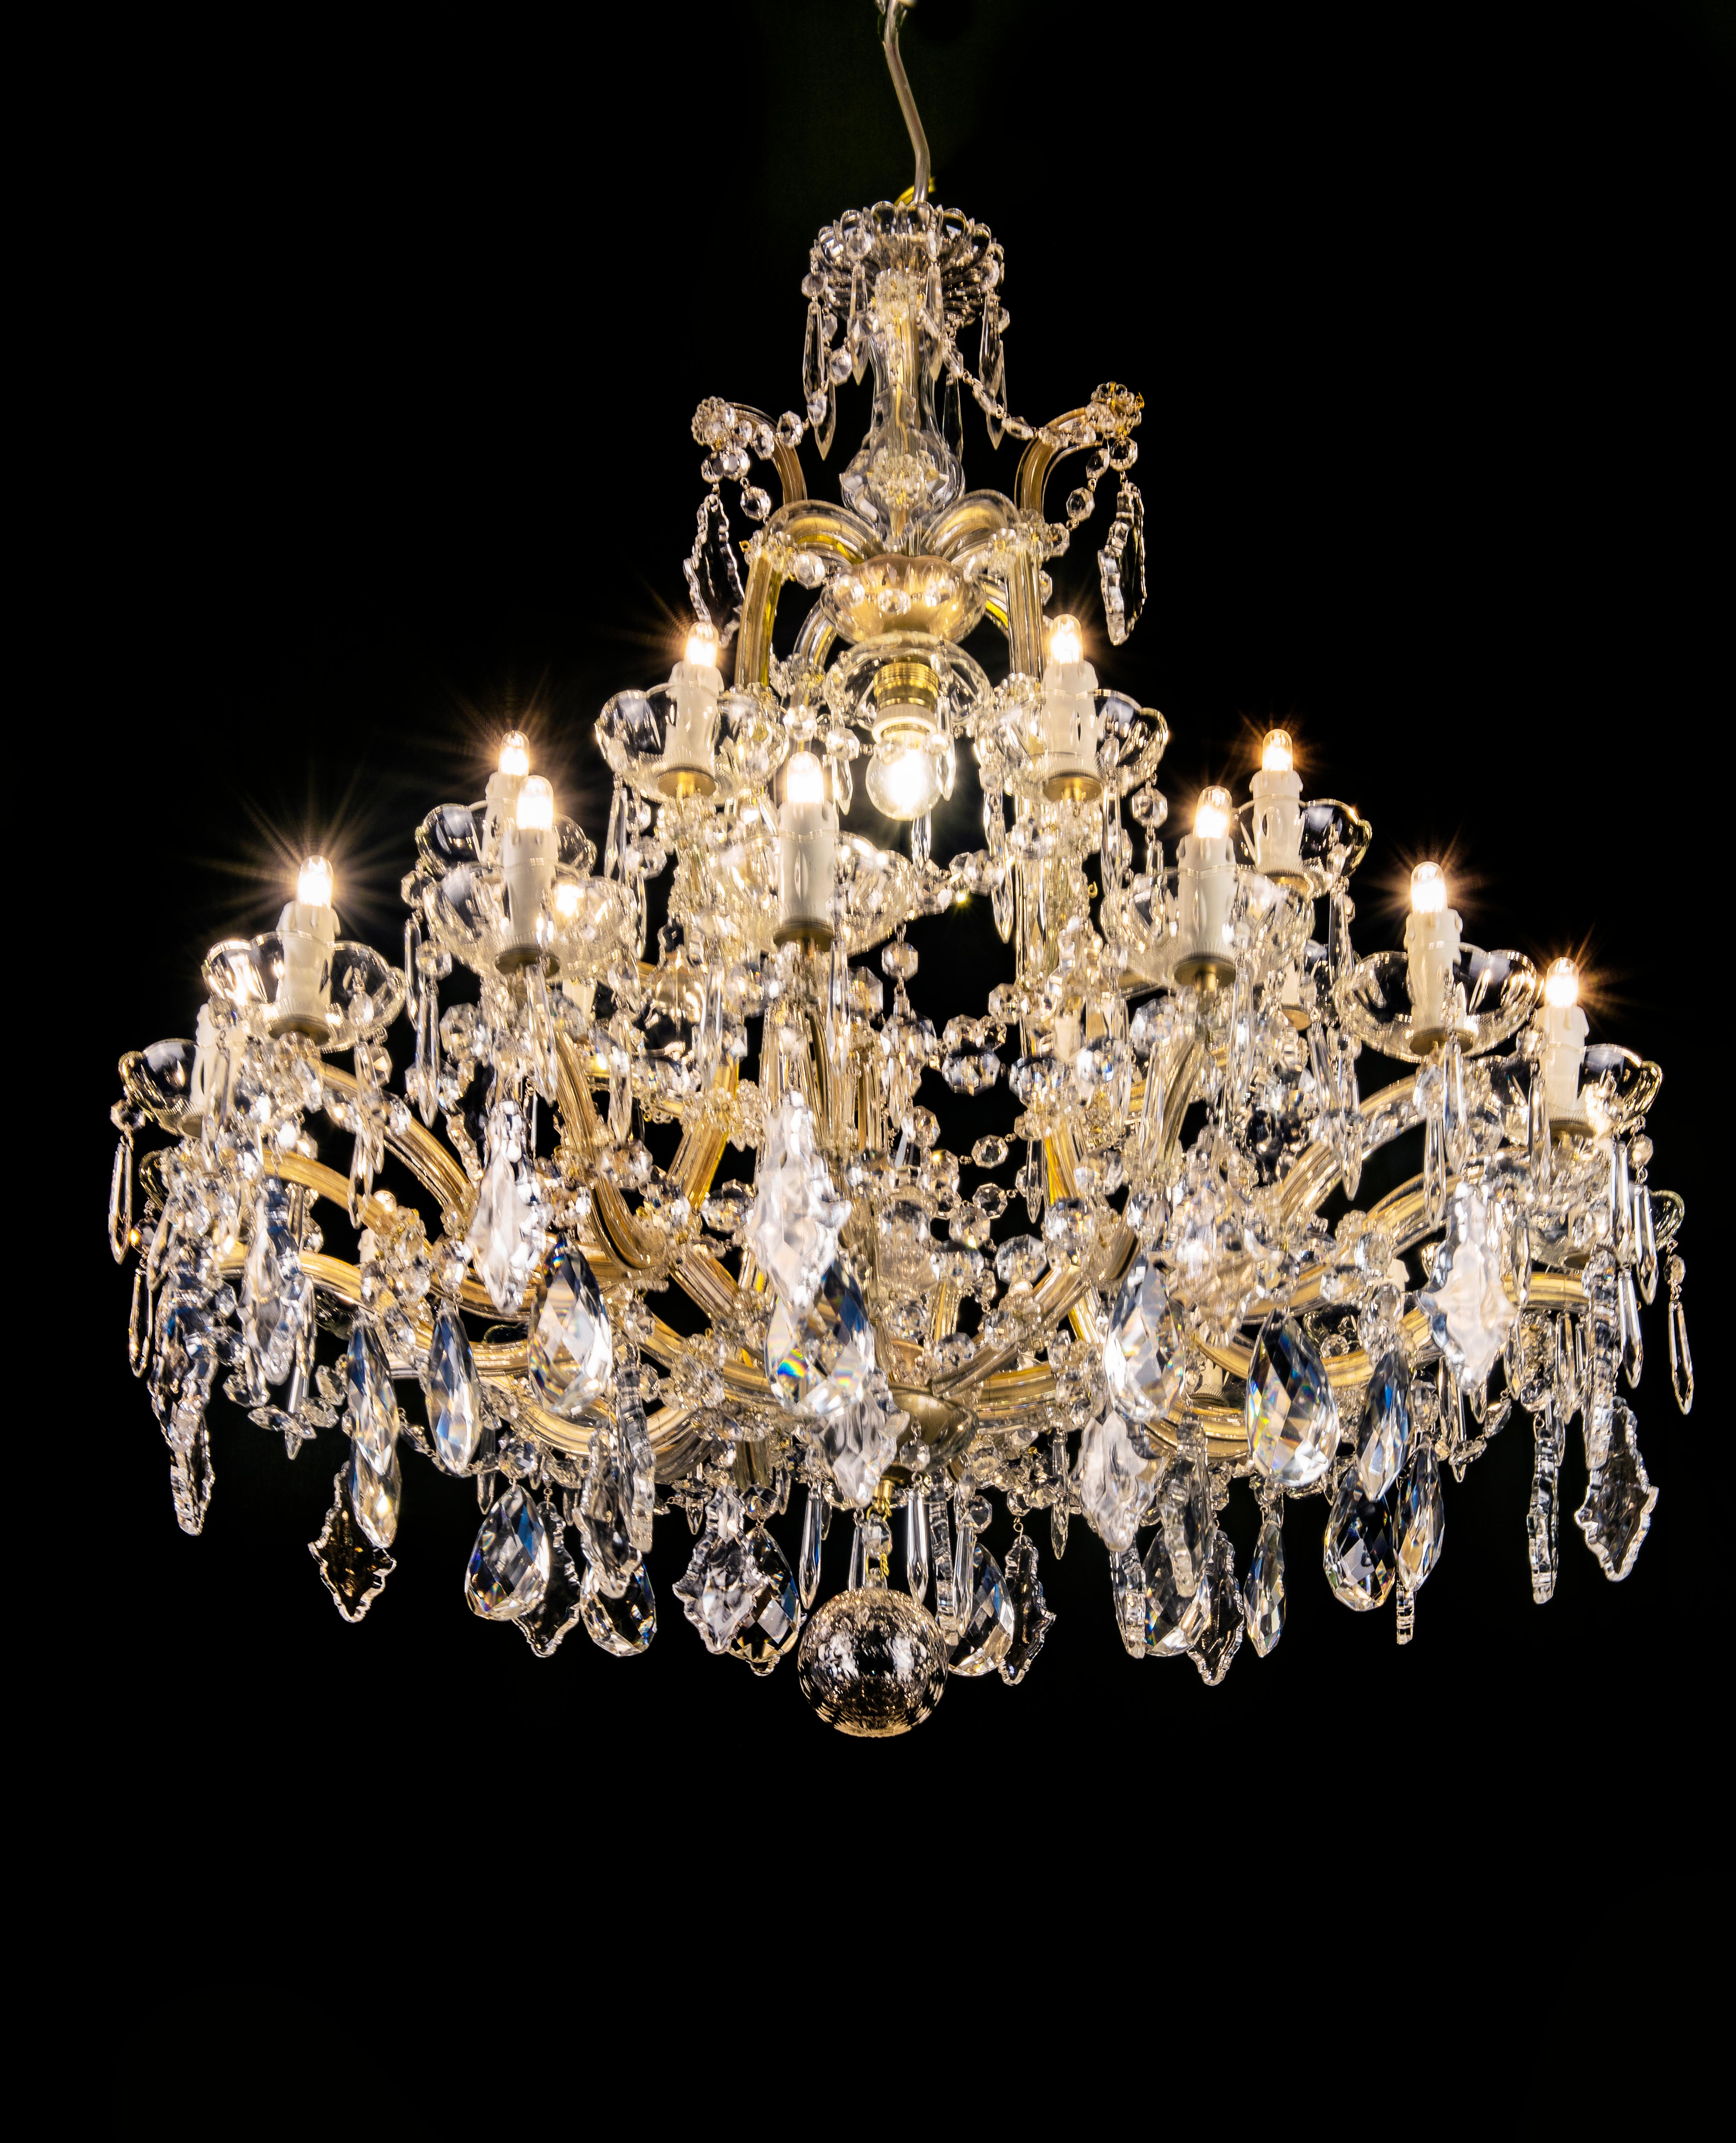 Faceted Pair of 20th Century Italian Crystal Chandeliers Marie Therese Twentyfive Light 